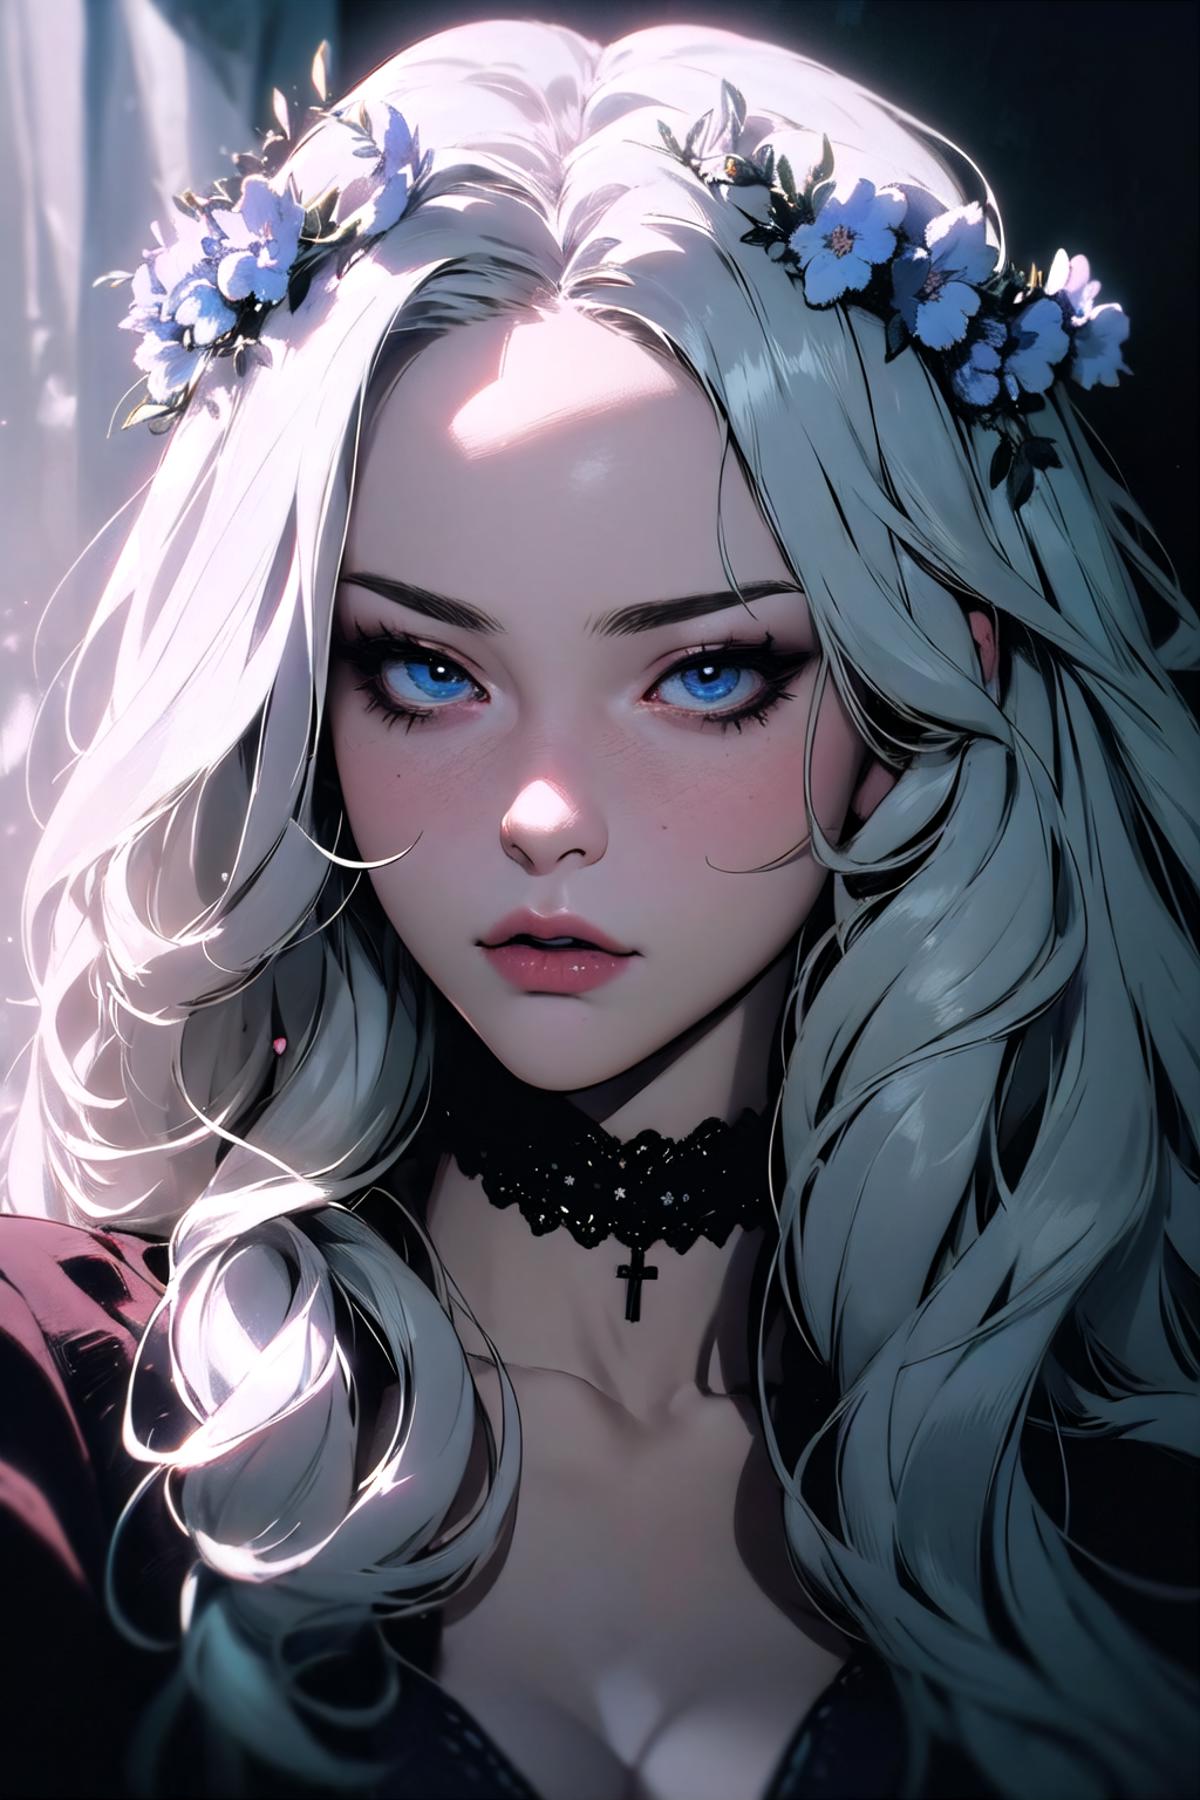 A beautifully illustrated image of a woman with long blond hair wearing a necklace and blue eyes.